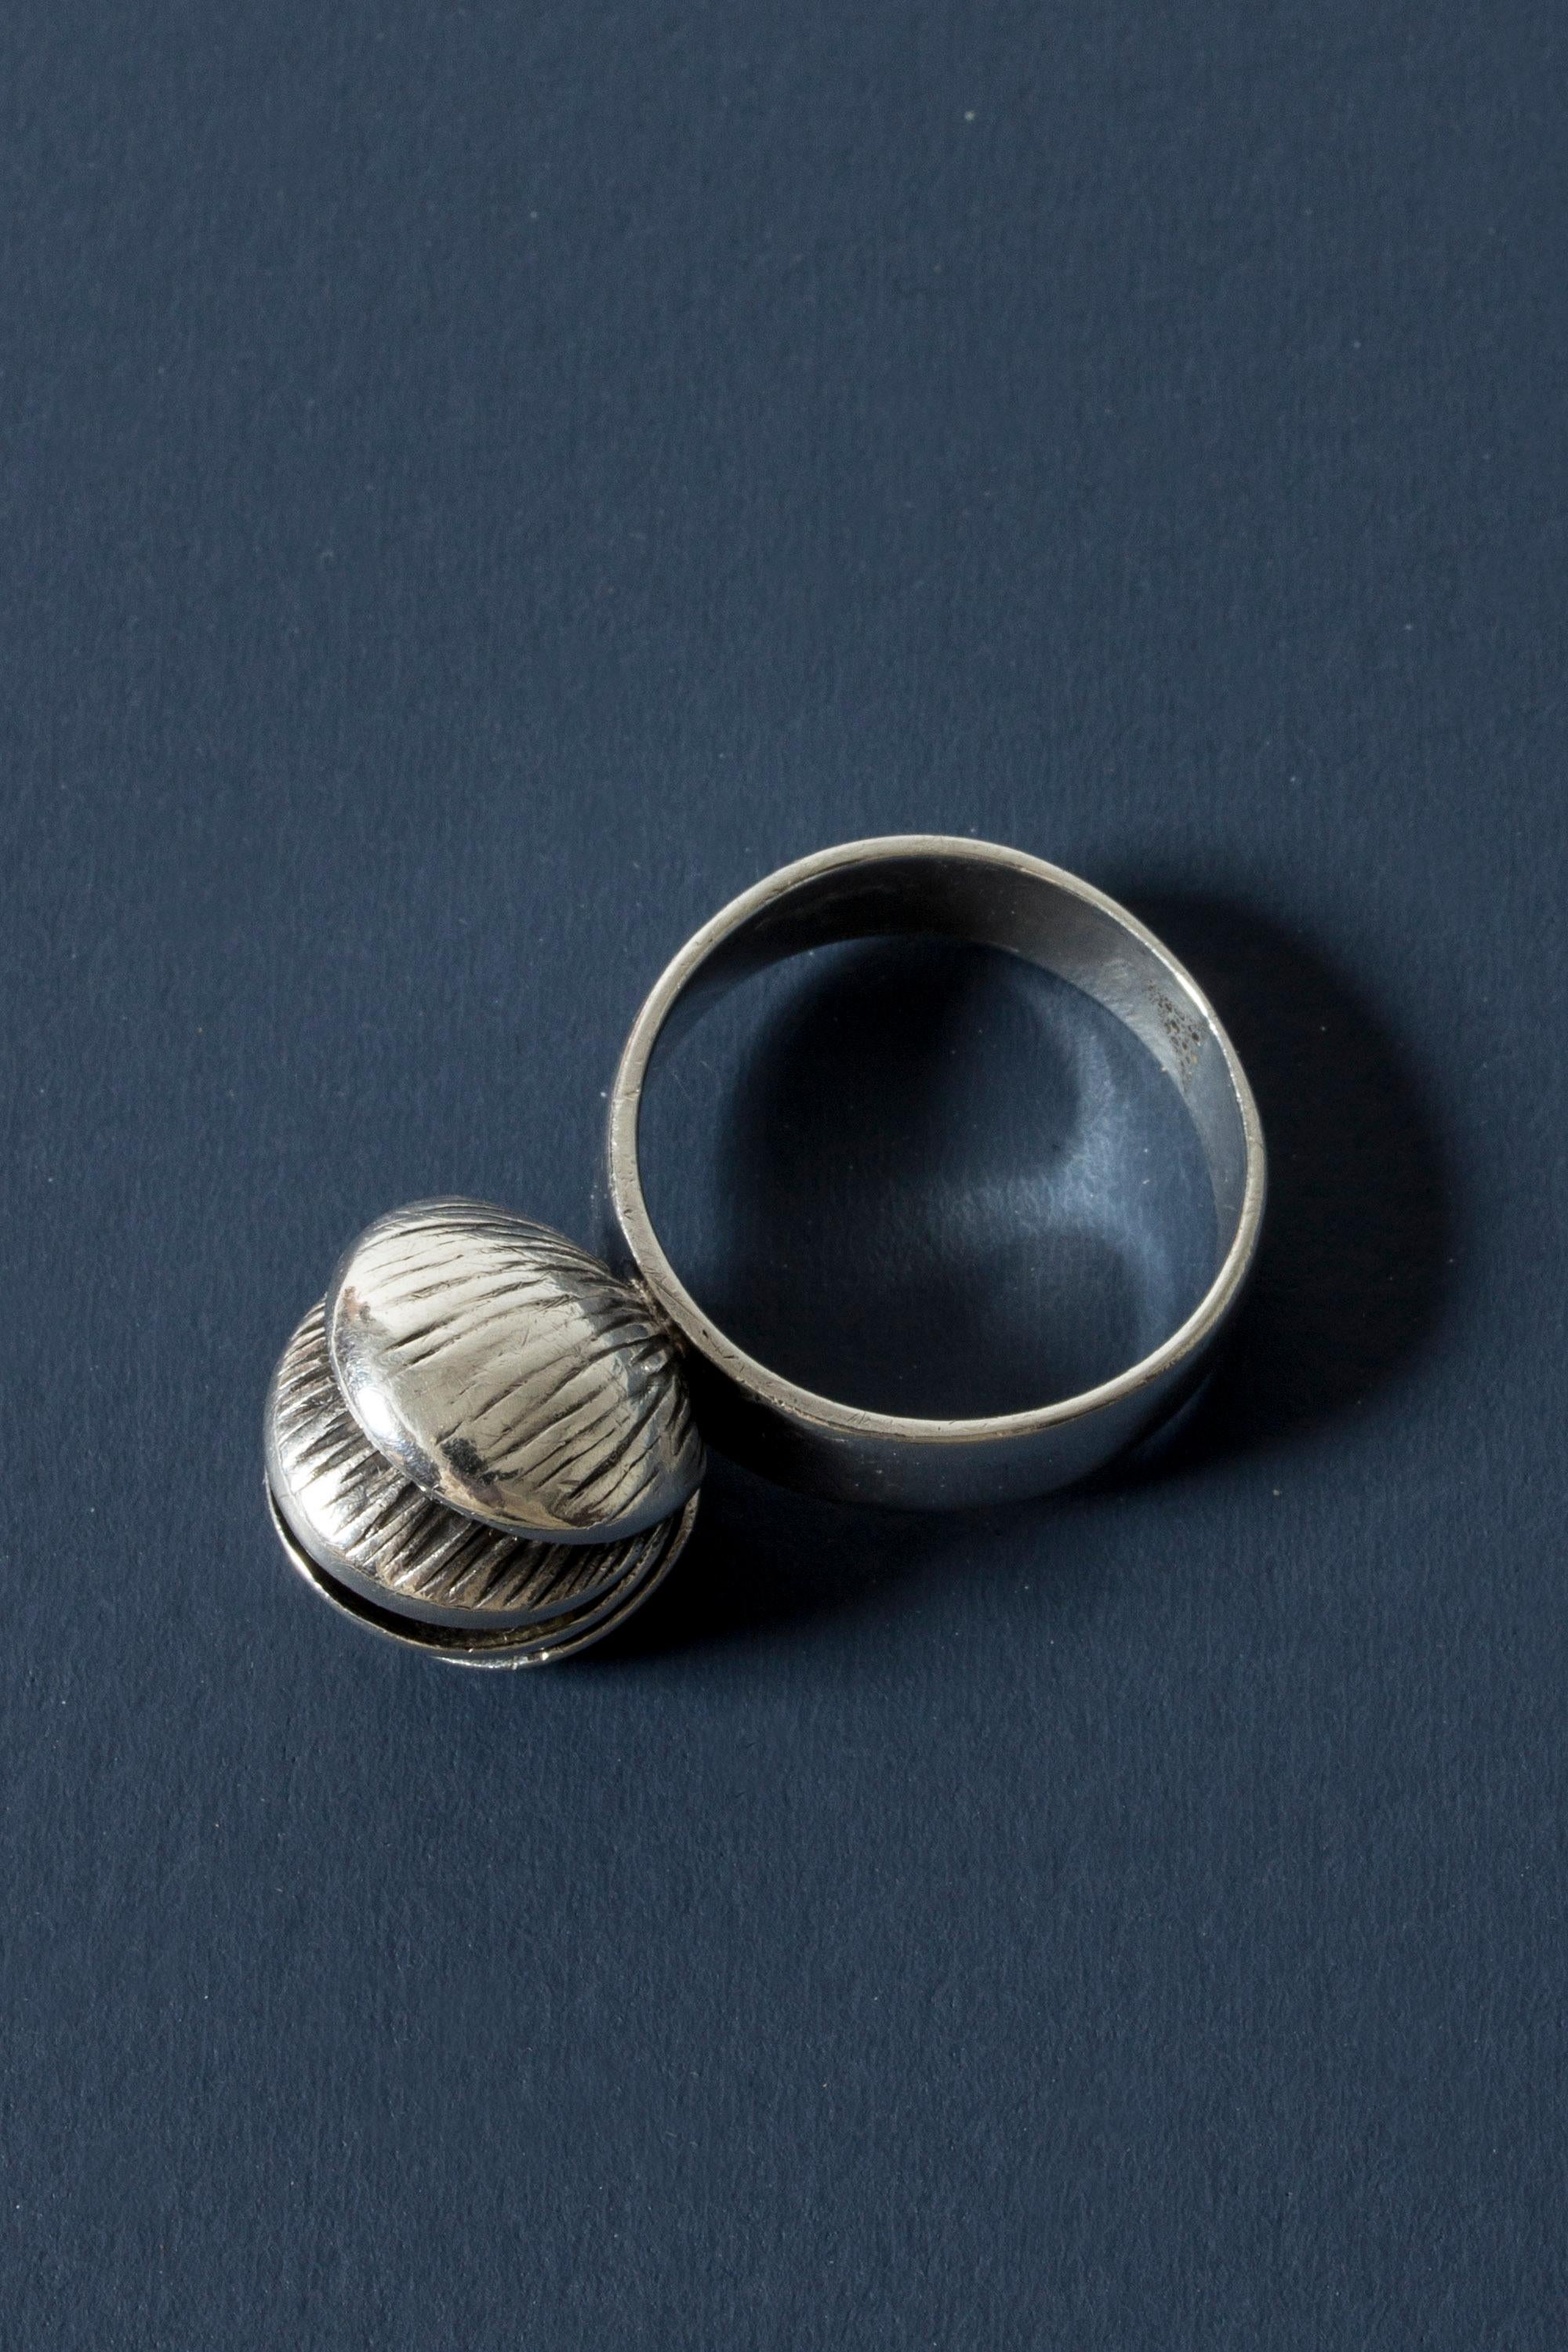 Beautiful silver ring by Elis Kauppi, adorned with a shell-like design. The layers of the shell open up and hidden inside is a round carnelian stone. It is loose inside the shell and tinkles discreetly with movement.